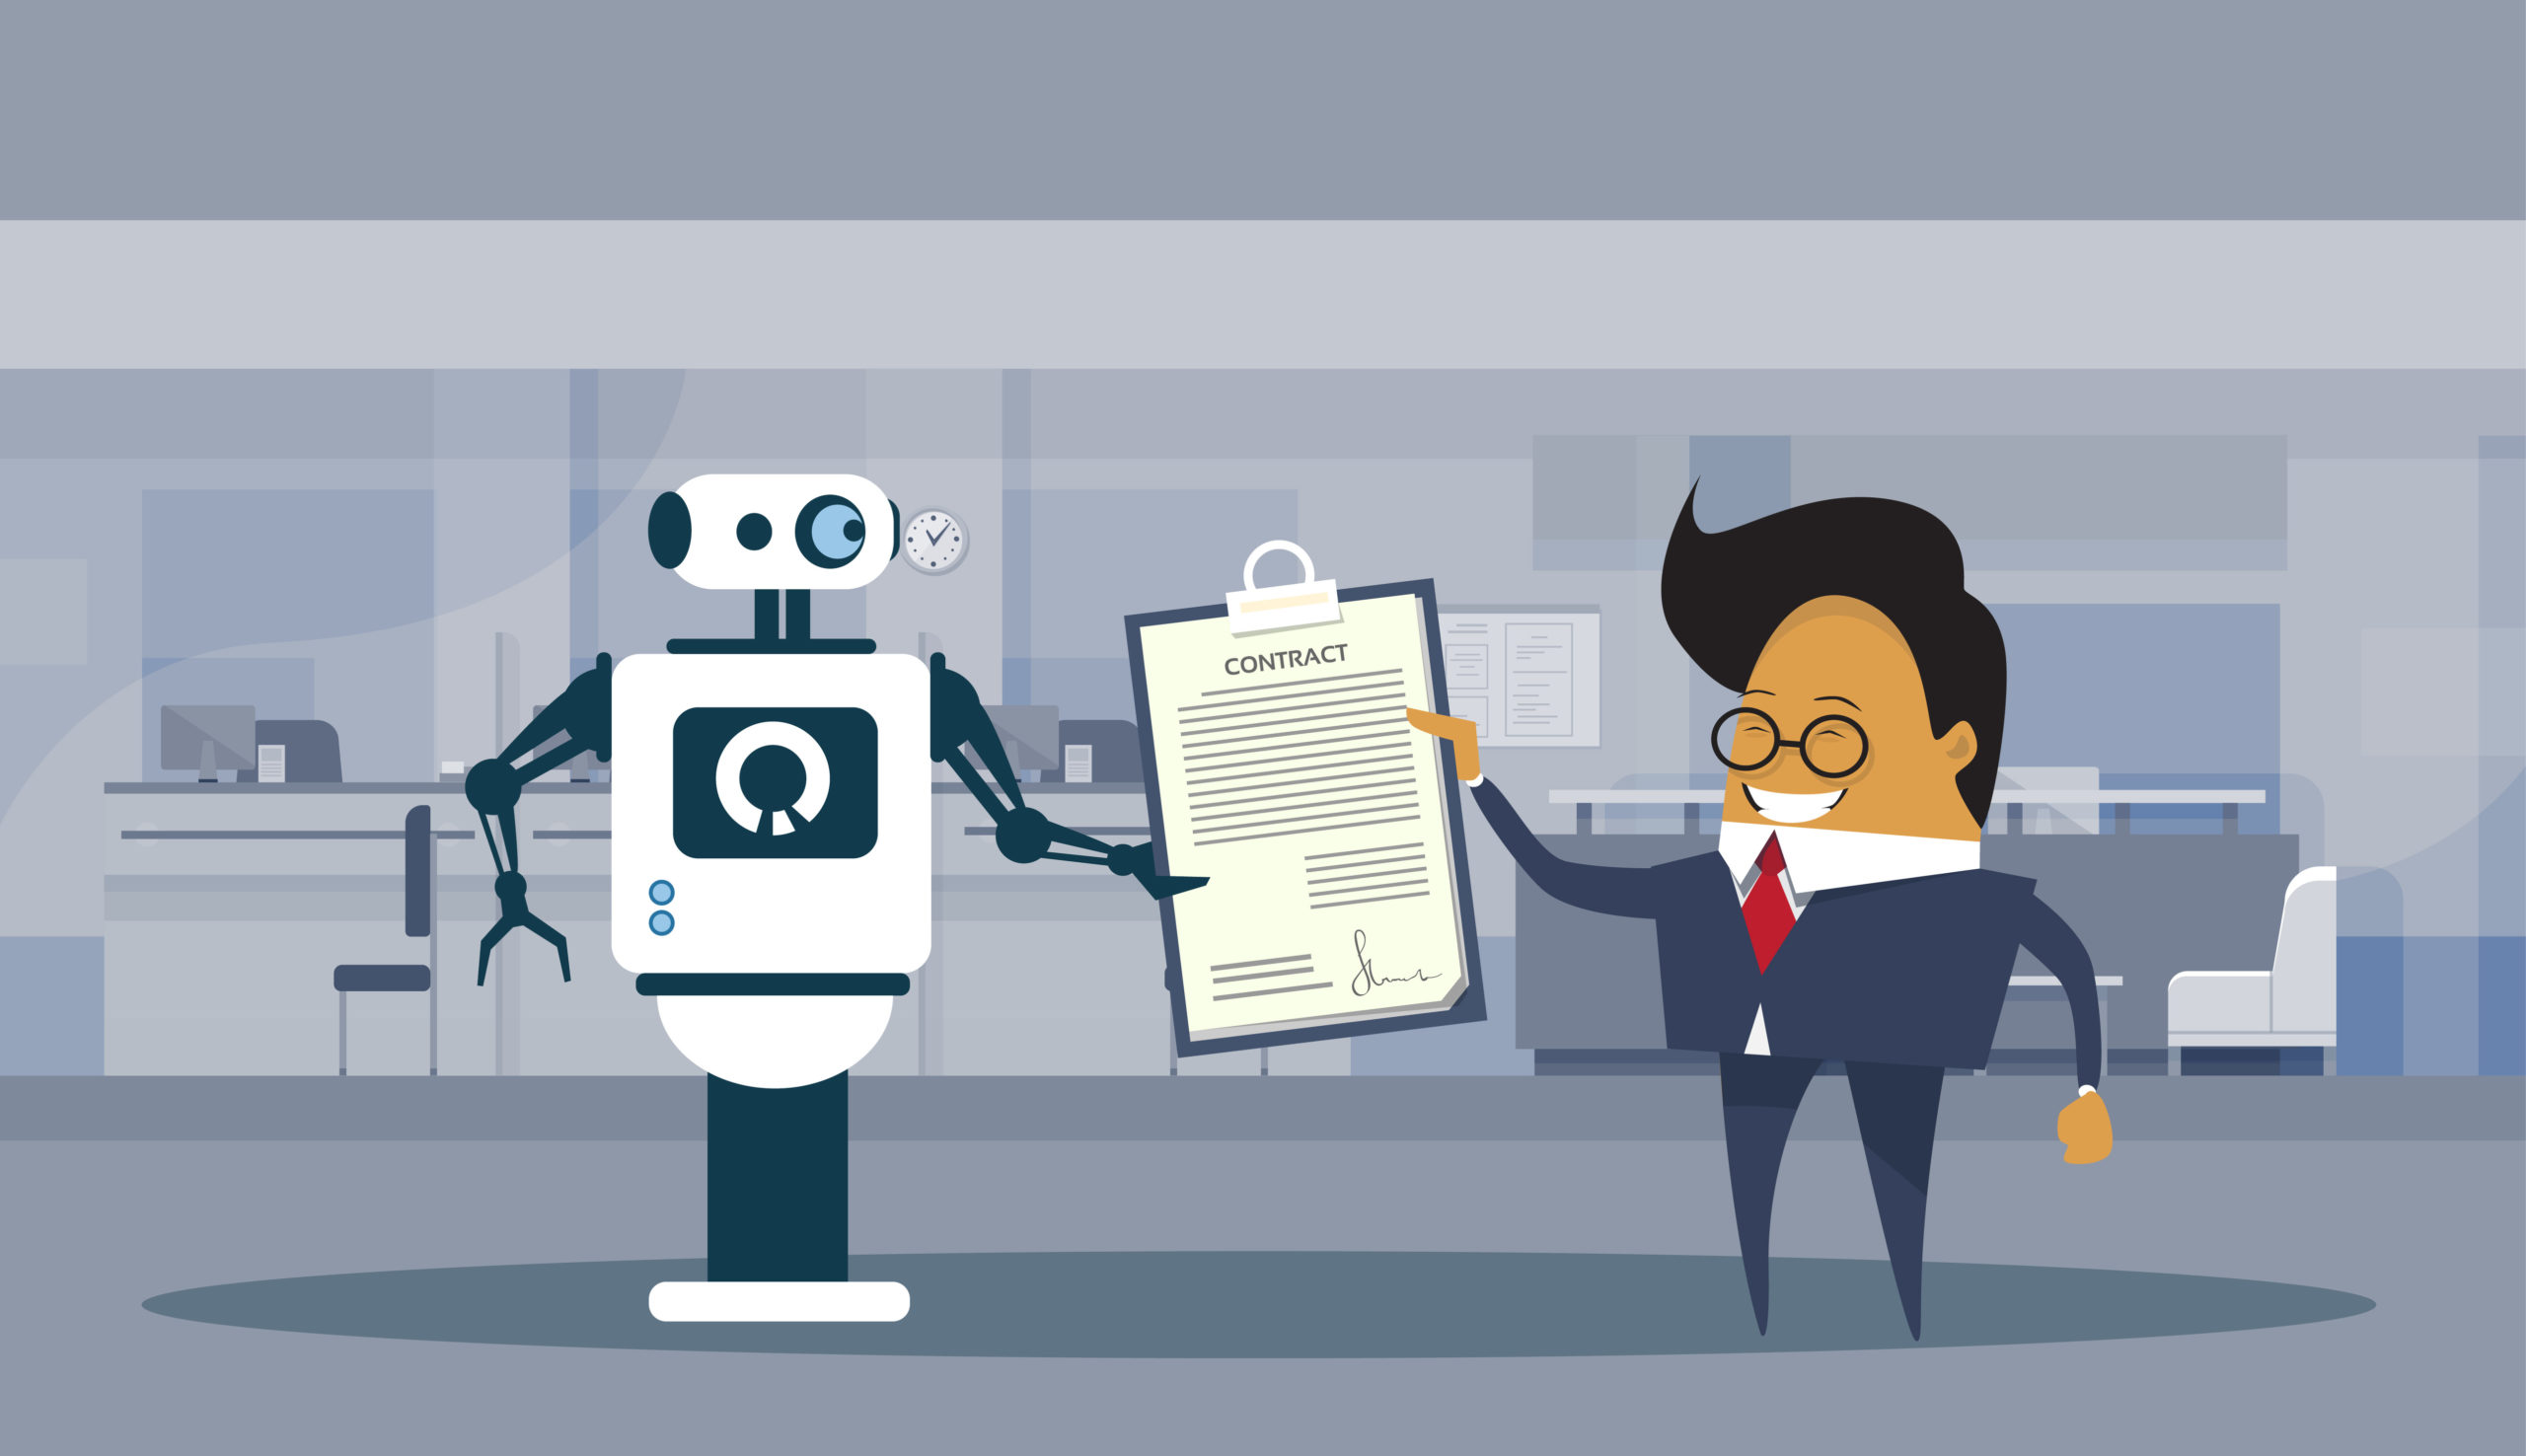 A cartoon image of a man and robot working on a contract.